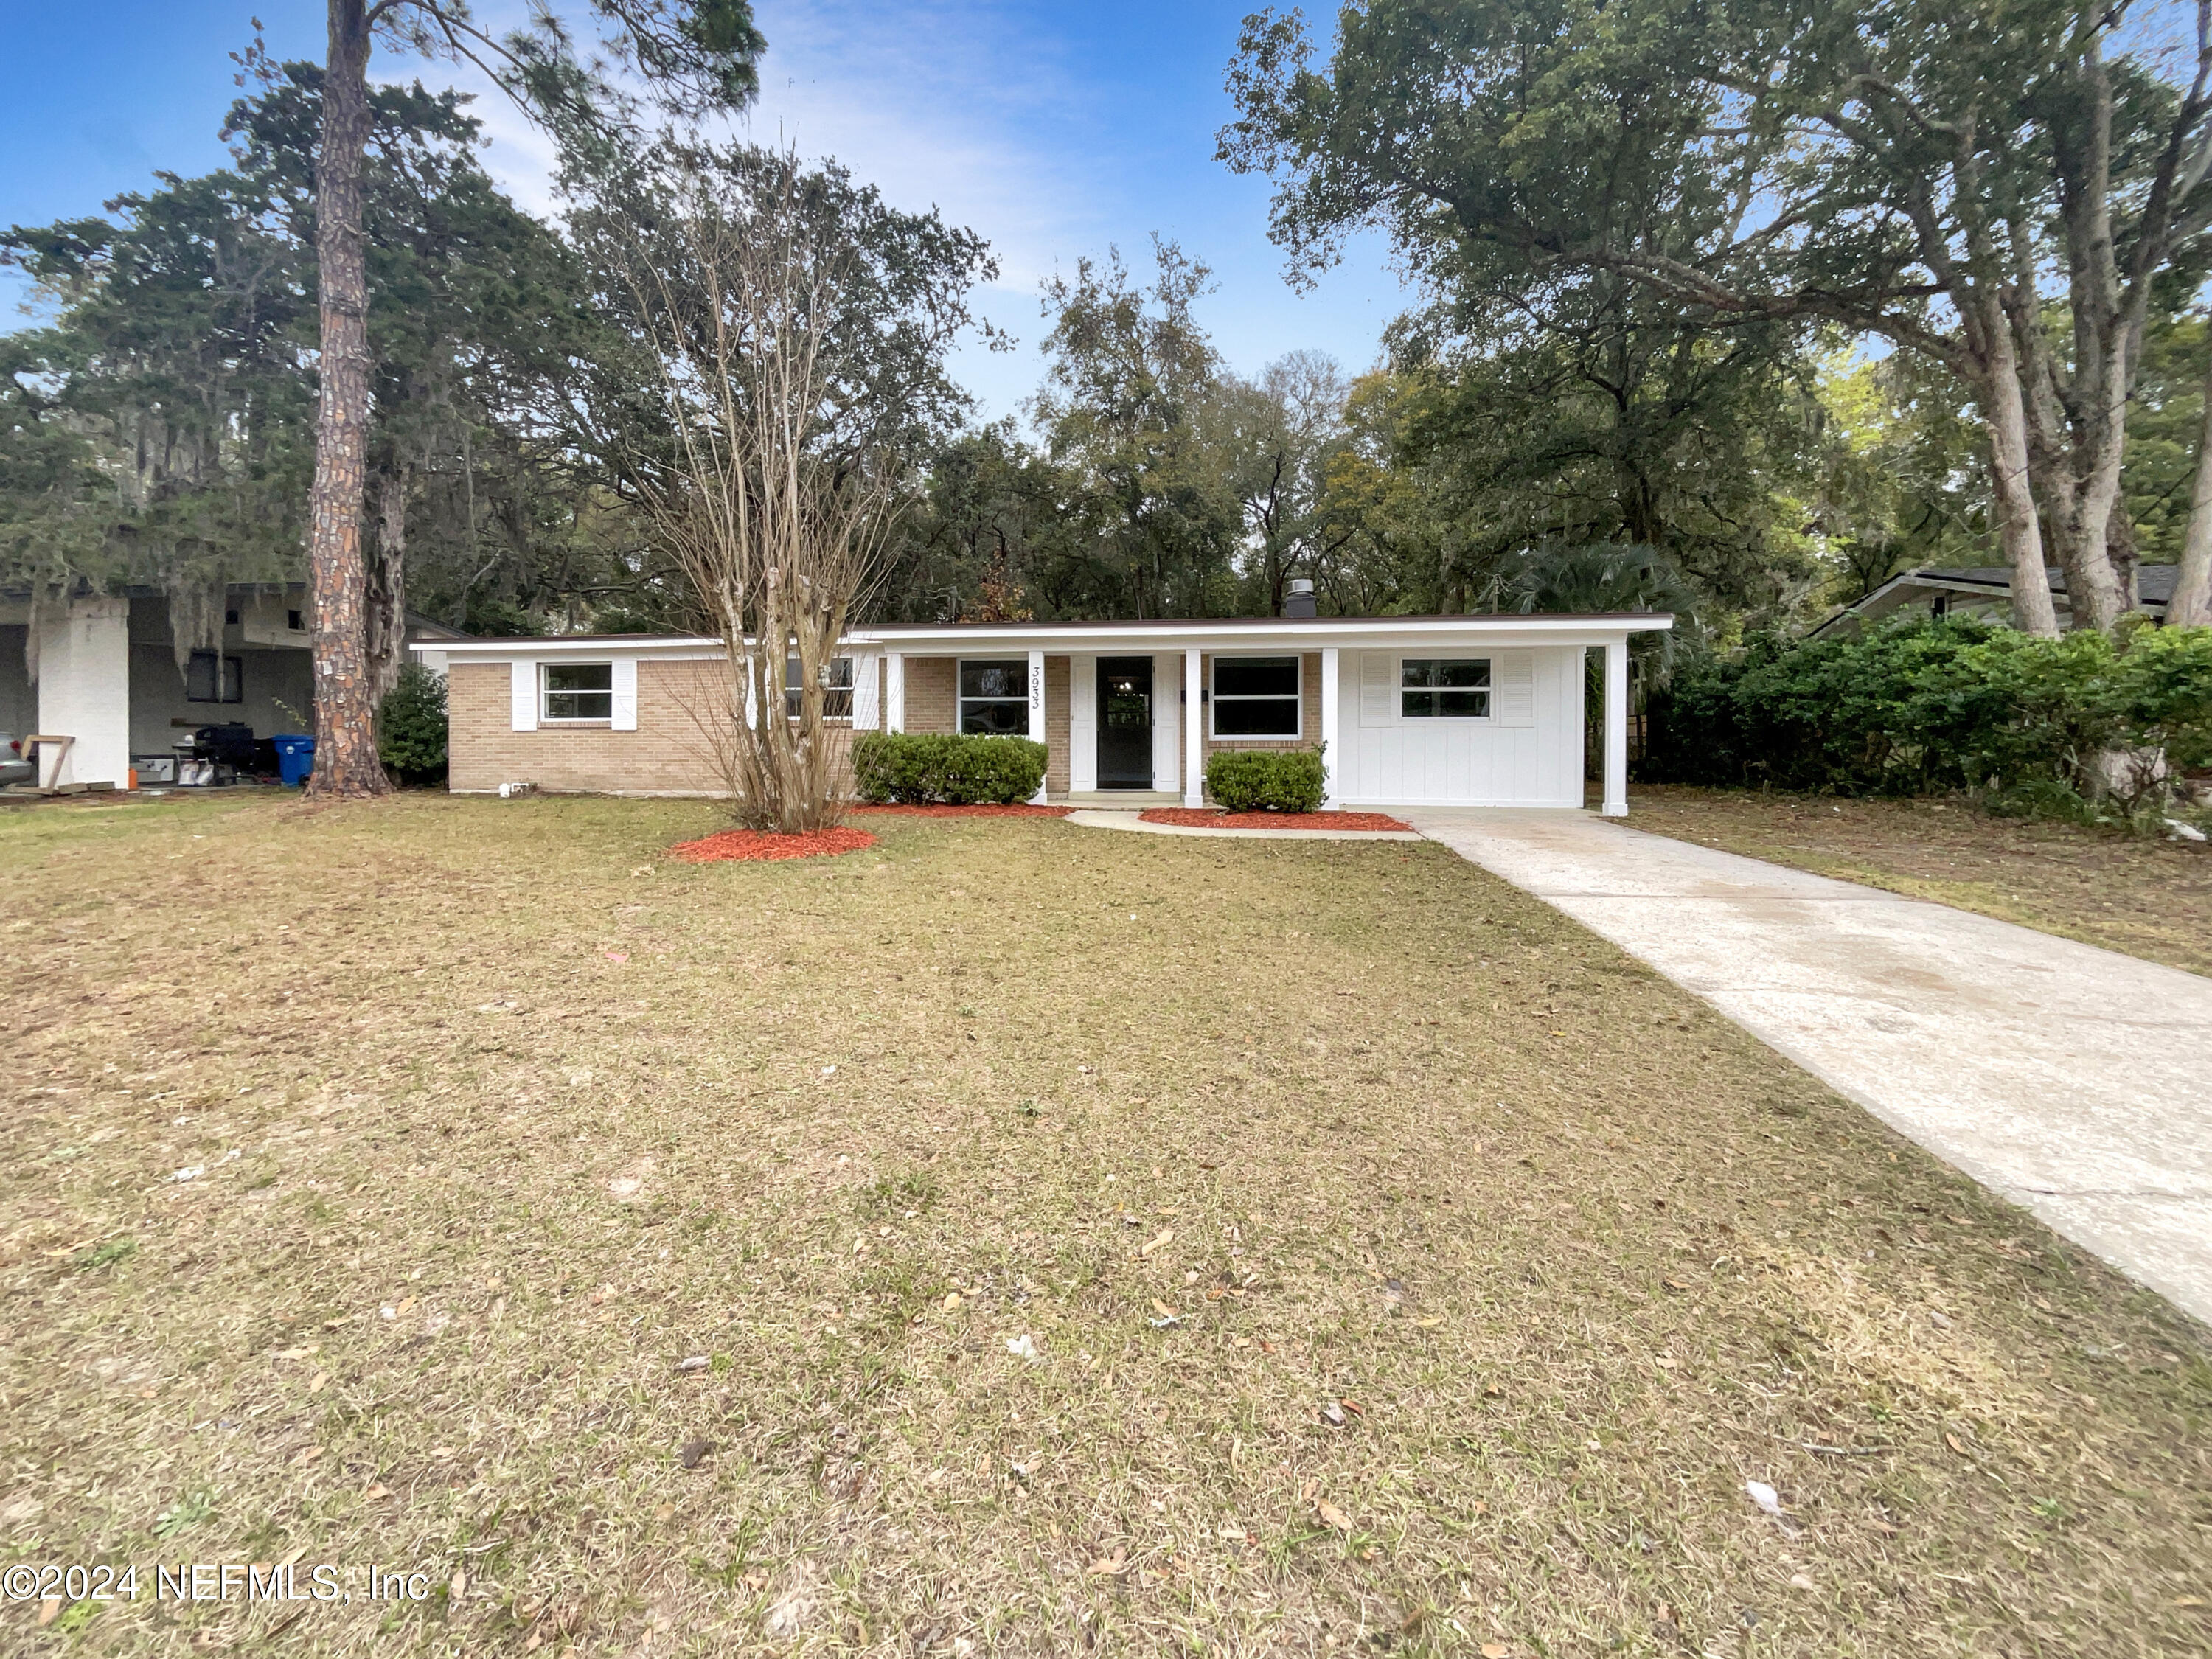 Jacksonville, FL home for sale located at 3933 Meek Drive, Jacksonville, FL 32277